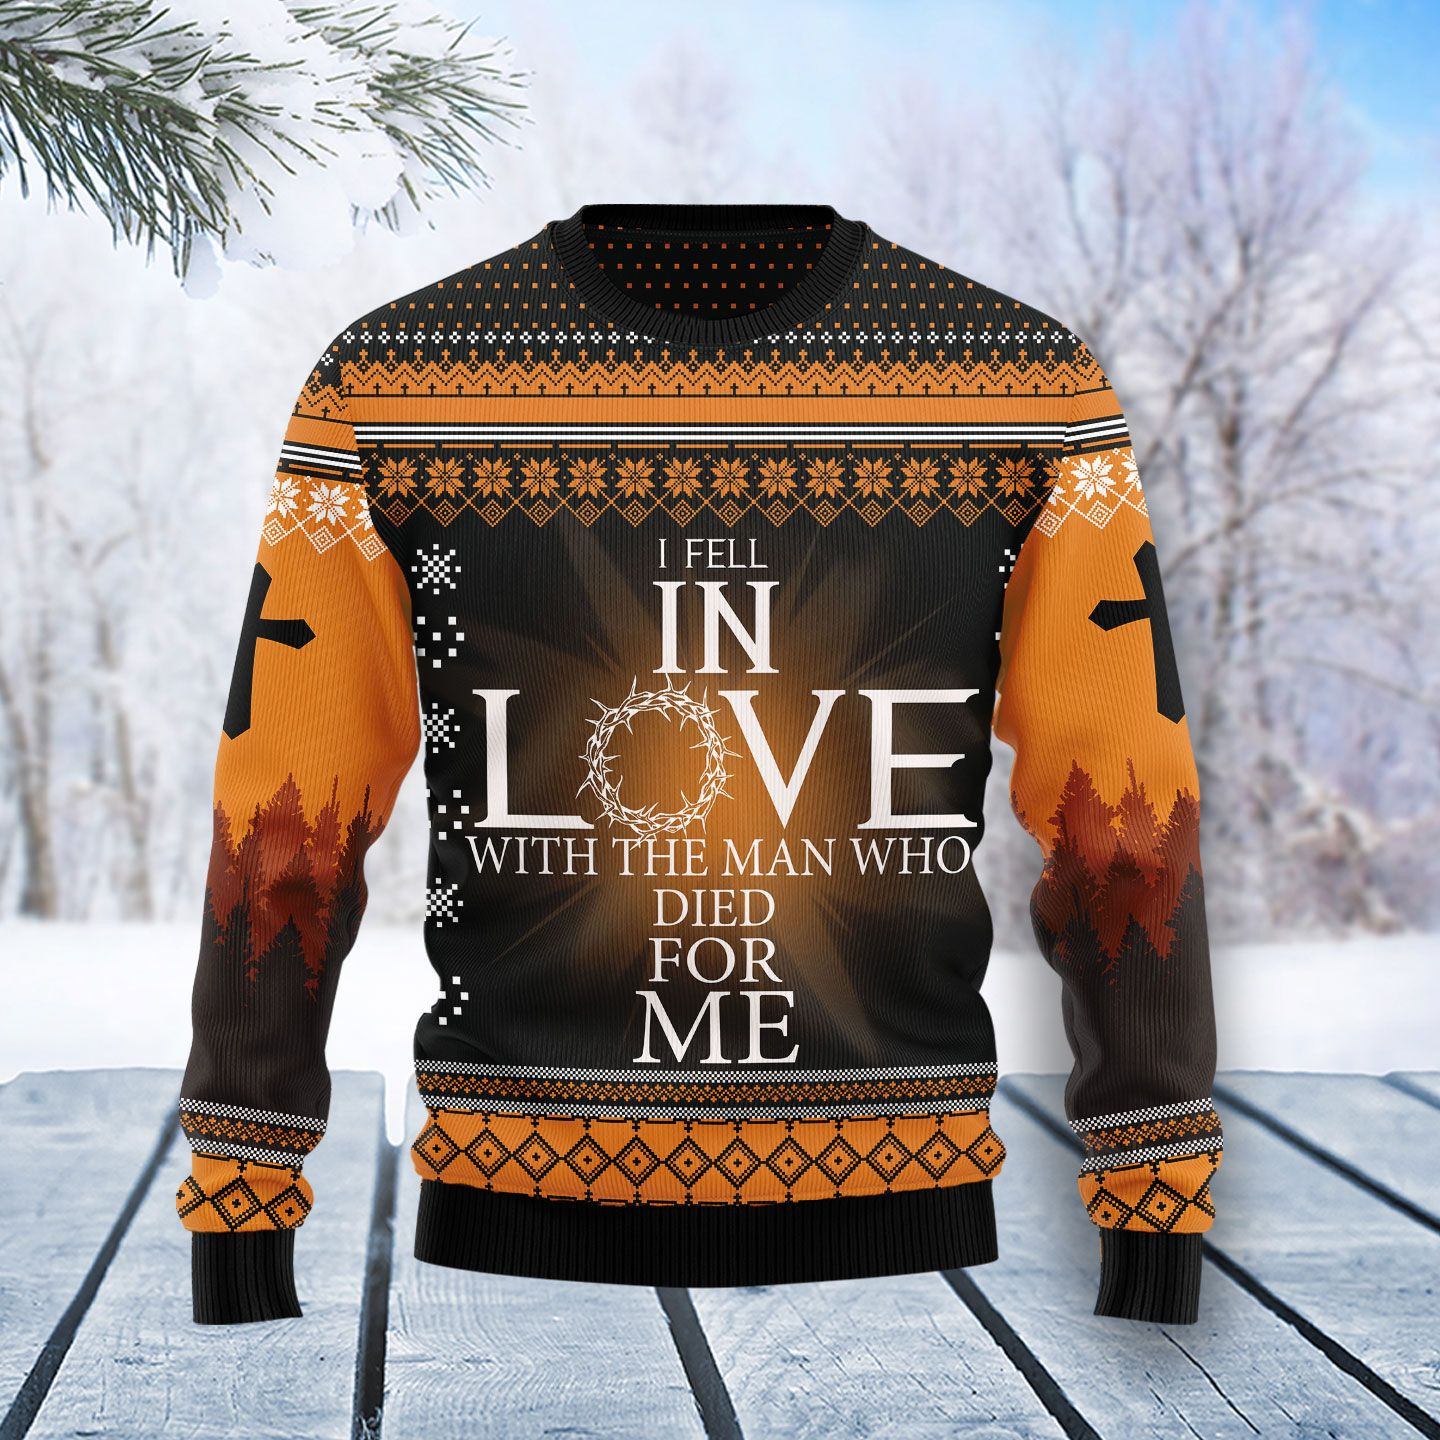 Christian Christmas Ugly Christmas Sweater Ugly Sweater For Men Women